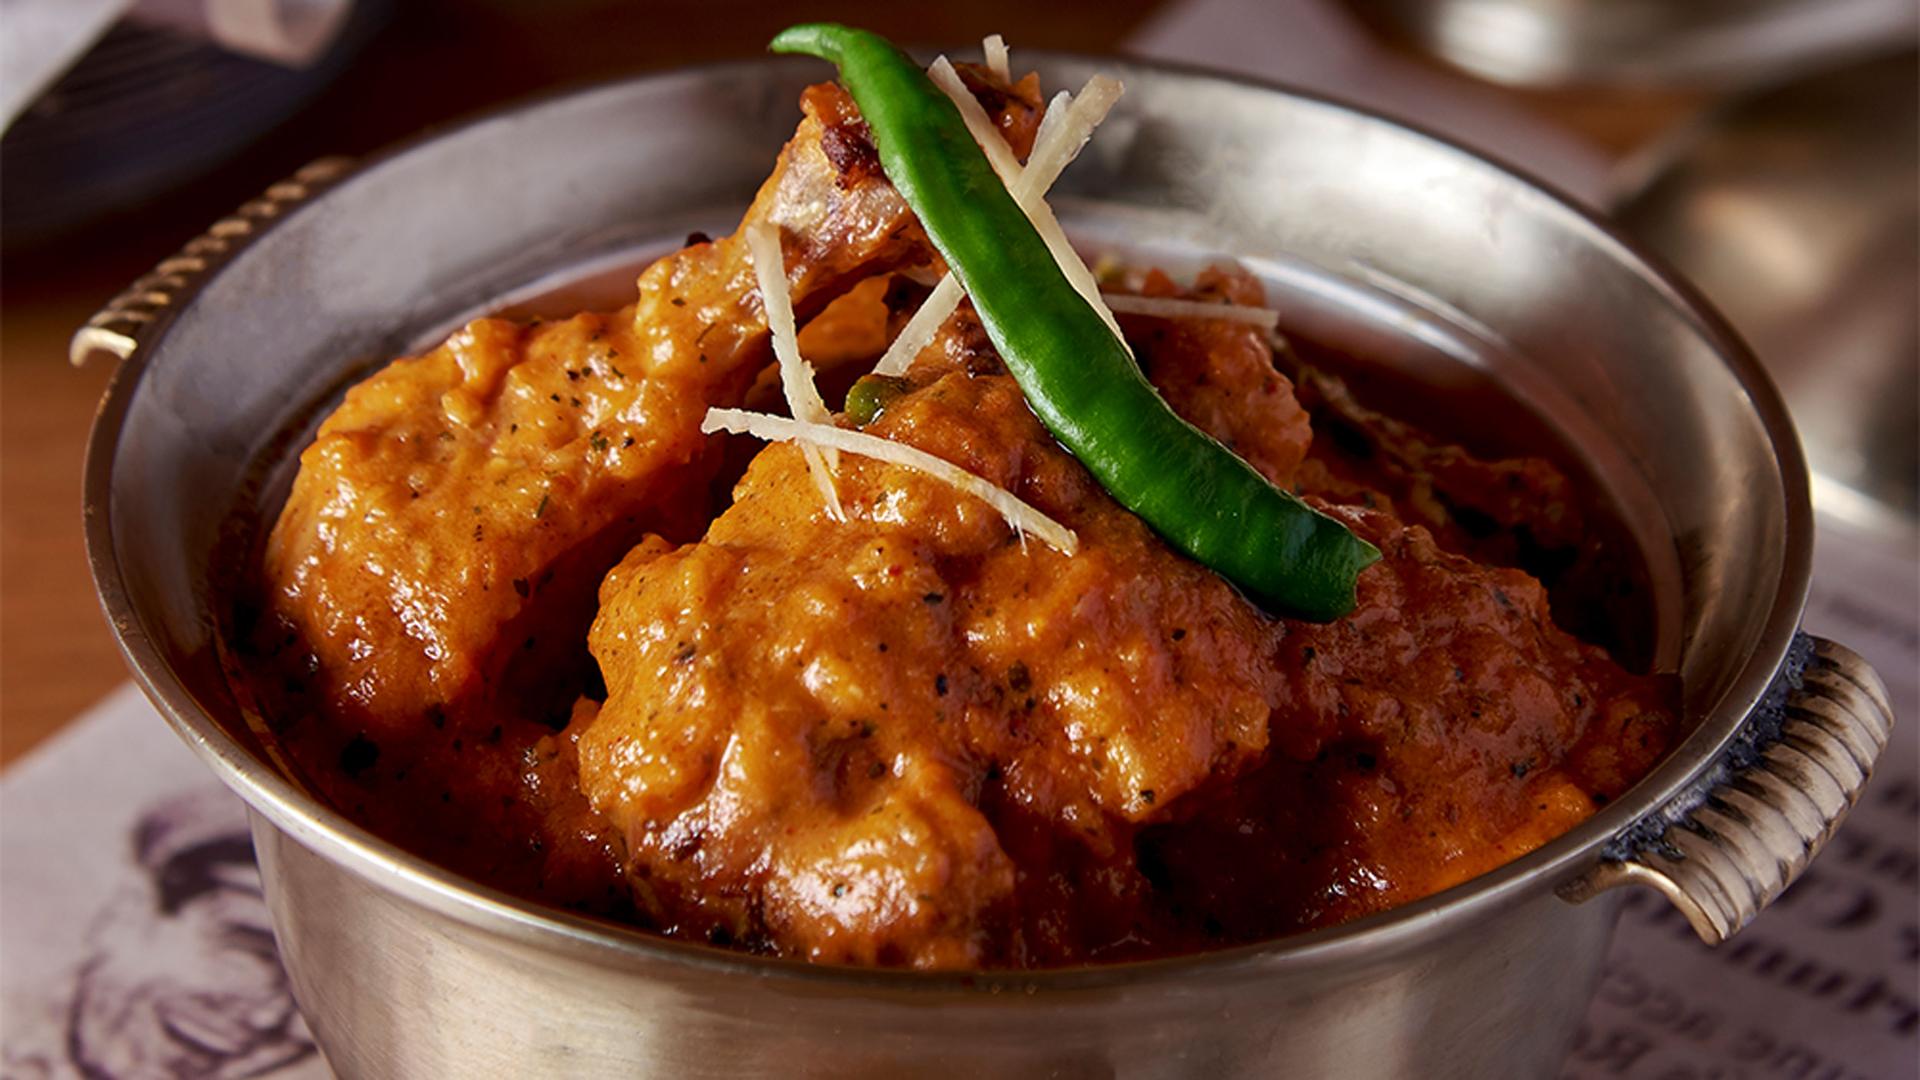 The beloved Indian dish, butter chicken.